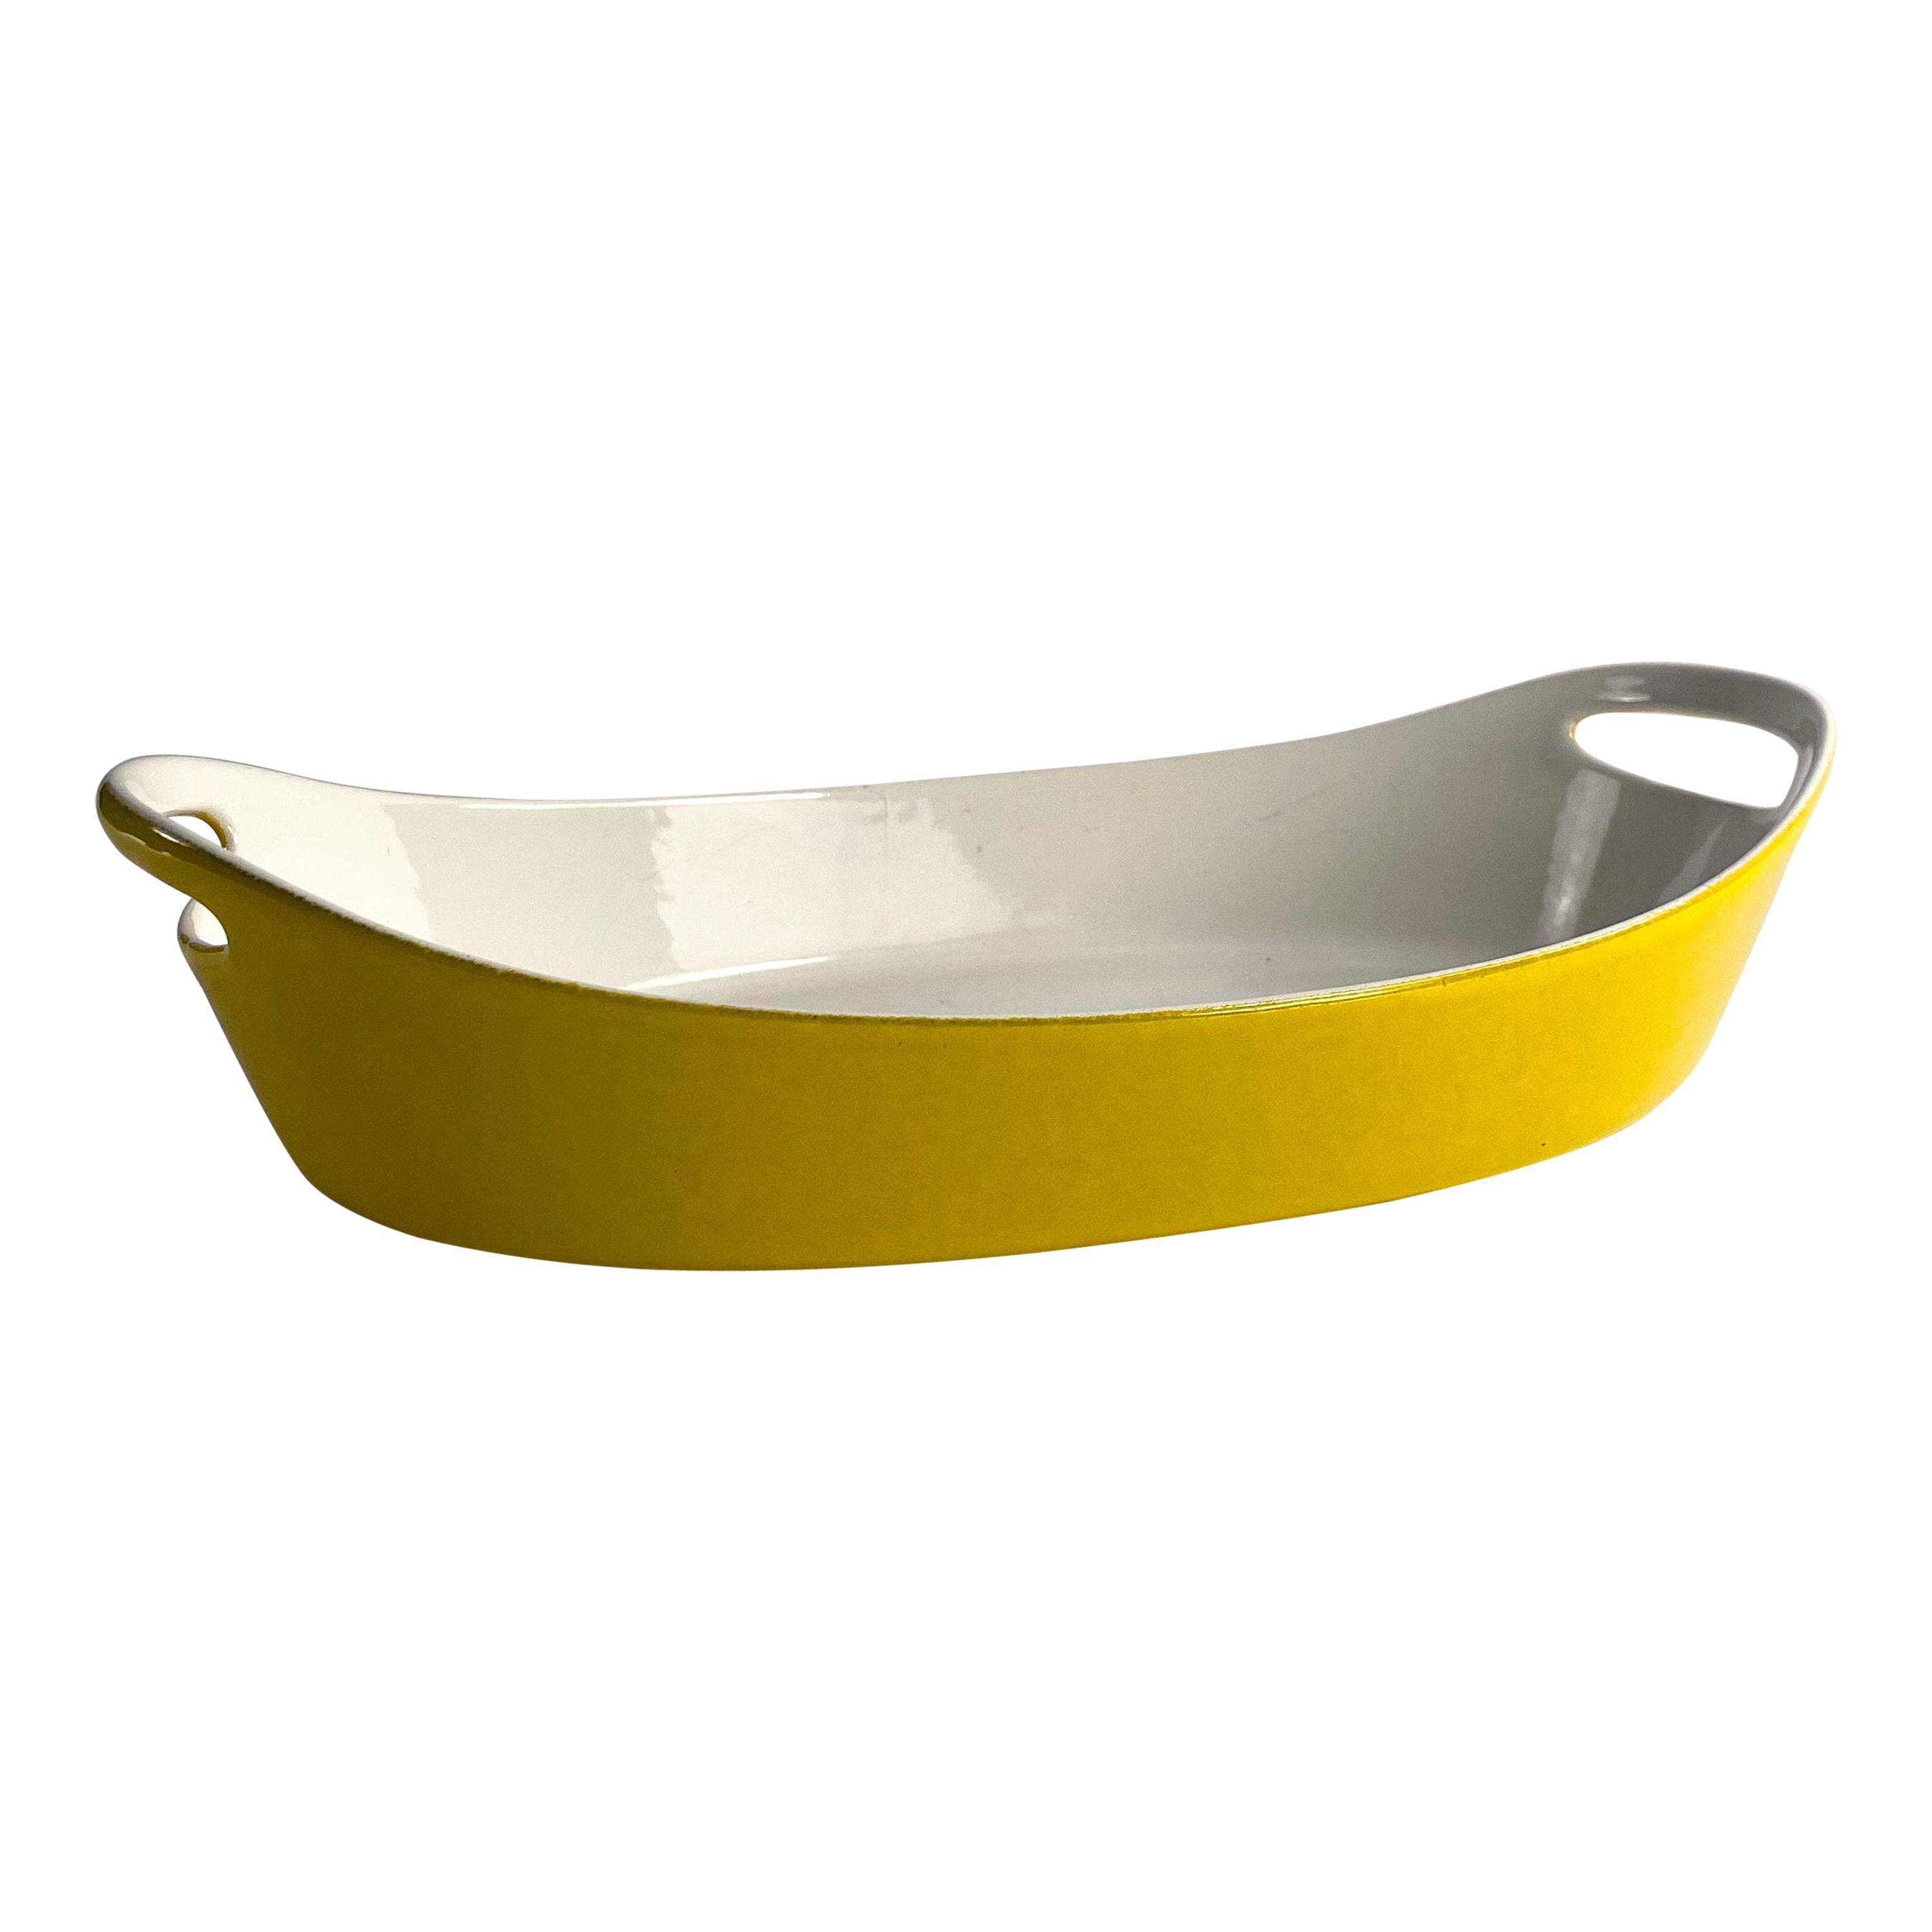 vintage yellow enameled castiron casserole dish by Michael Lax for Copco